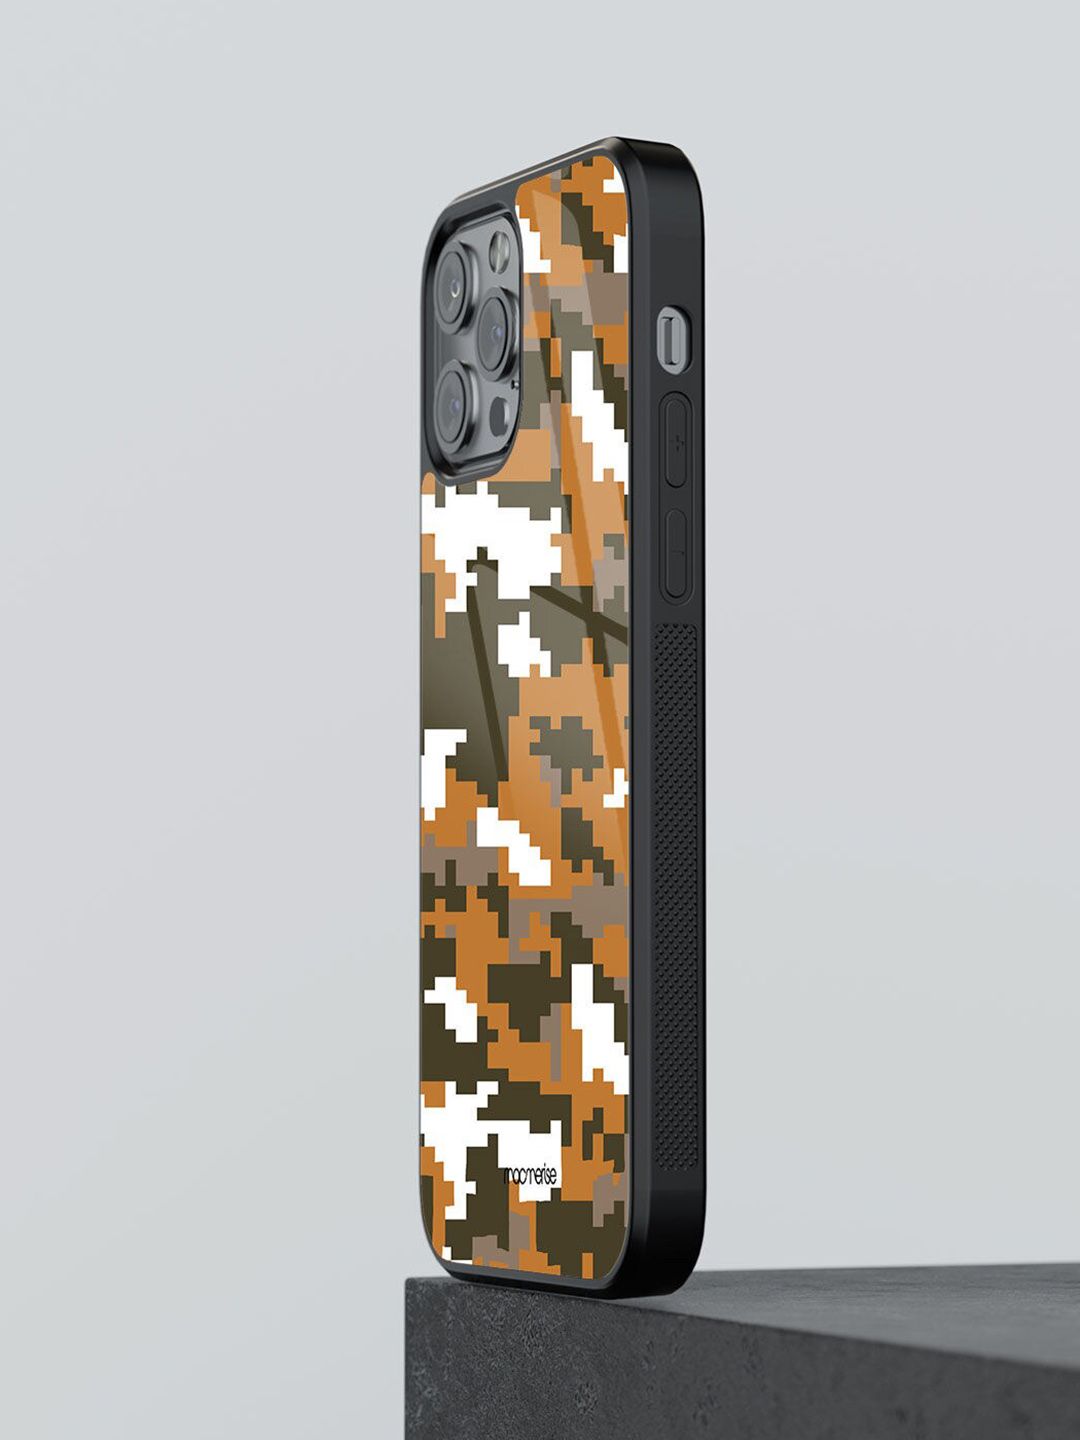 macmerise Green & Brown Printed Camo Pixel  iPhone 12 Pro Max Glass Phone Back Case Price in India